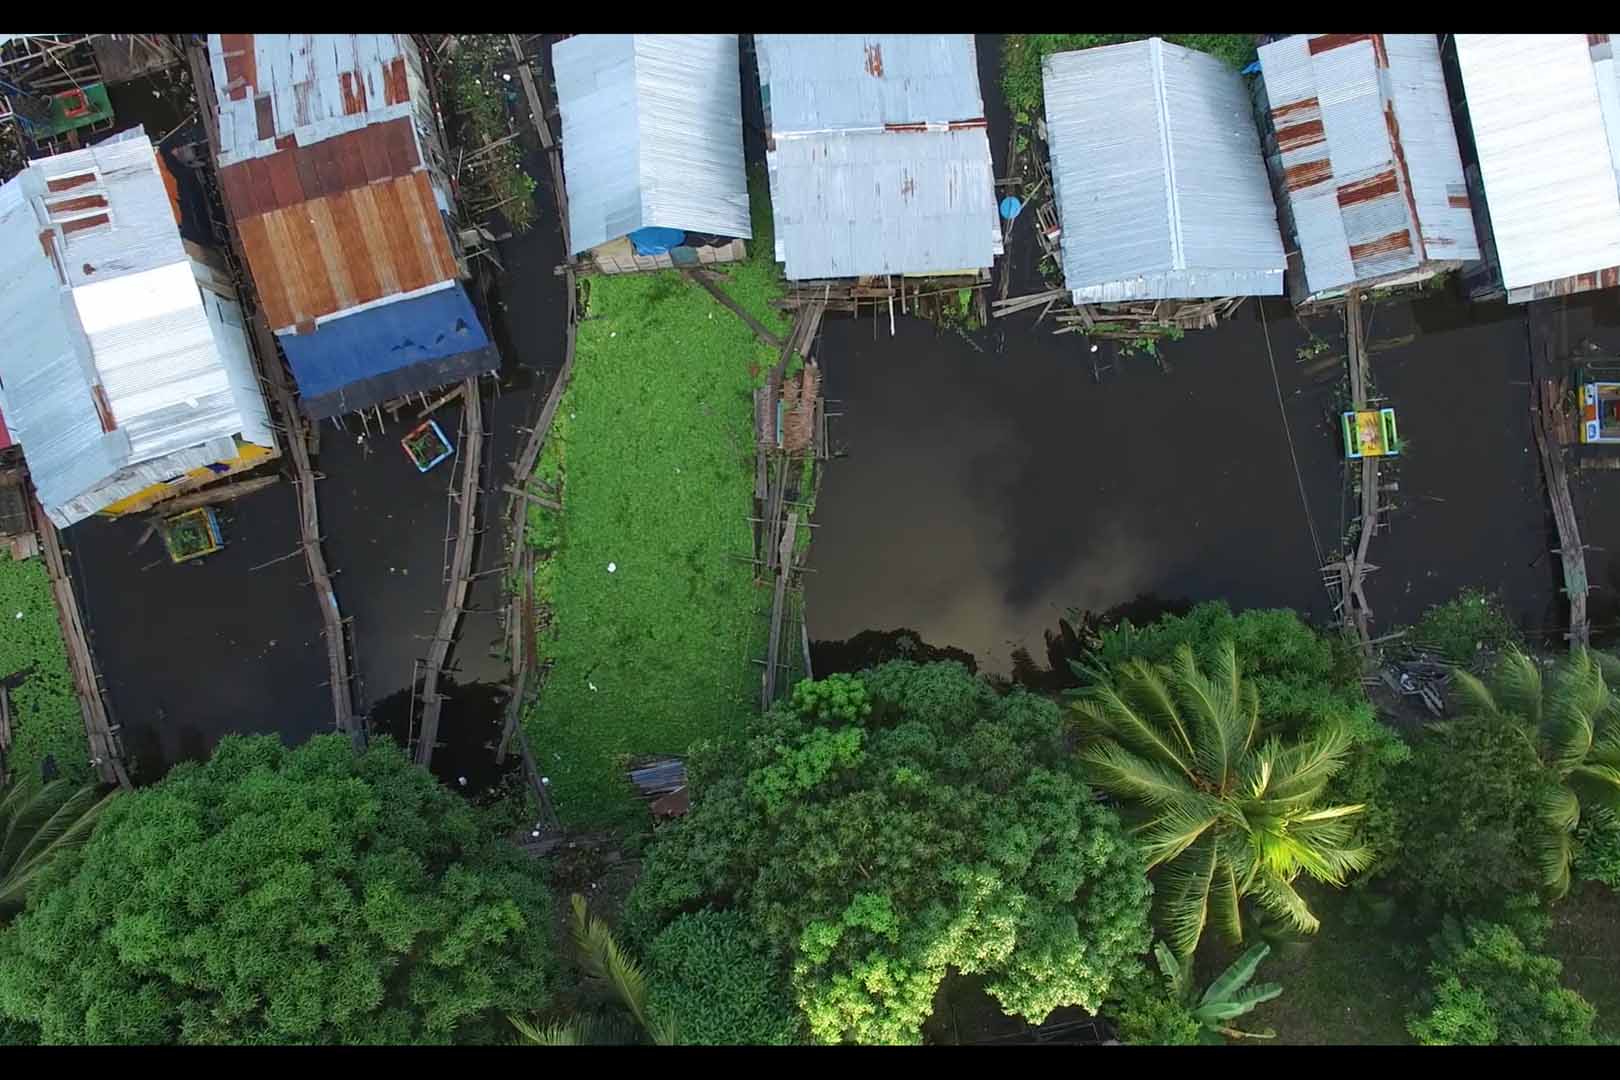 Overhead view of an amphibious community